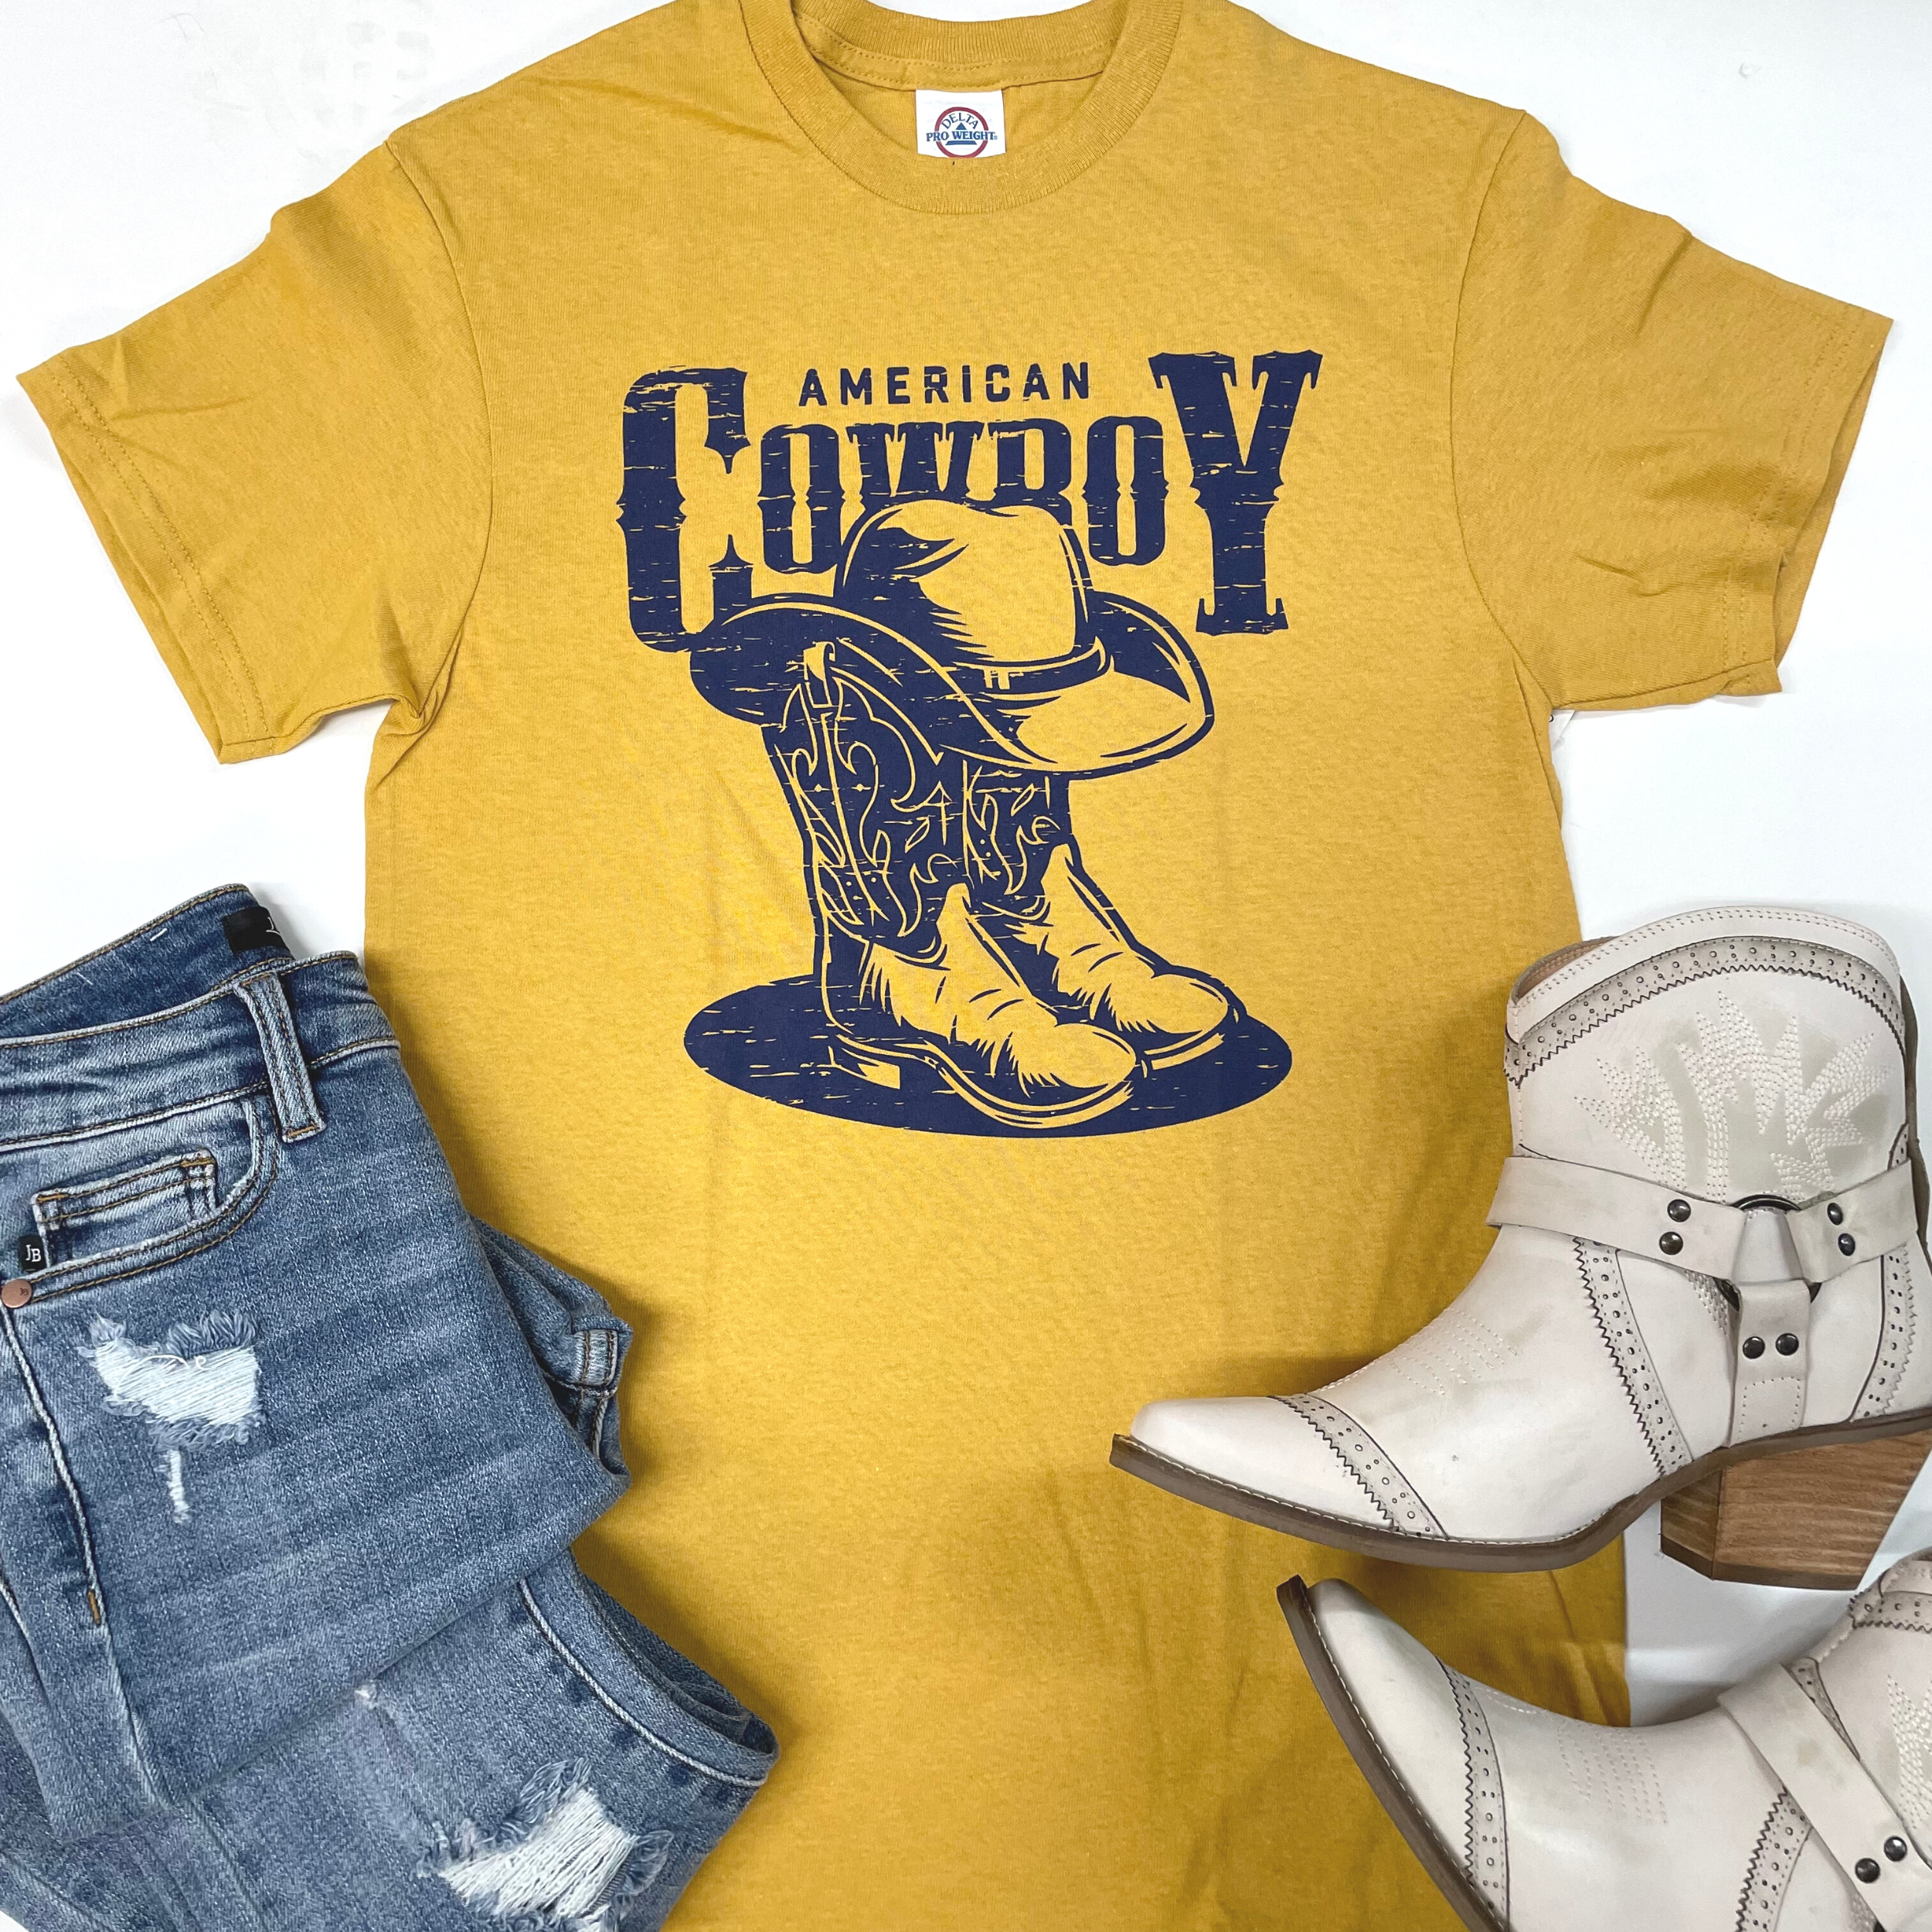 A mustard yellow tee is in the center of the picture on a solid white background. The tee has "American Cowboy" written in the center, with cowboy boots and a hat in navy. On the bottom left of the picture is a light wash pair of jeans and on the bottom right is a white pair of jeans. 